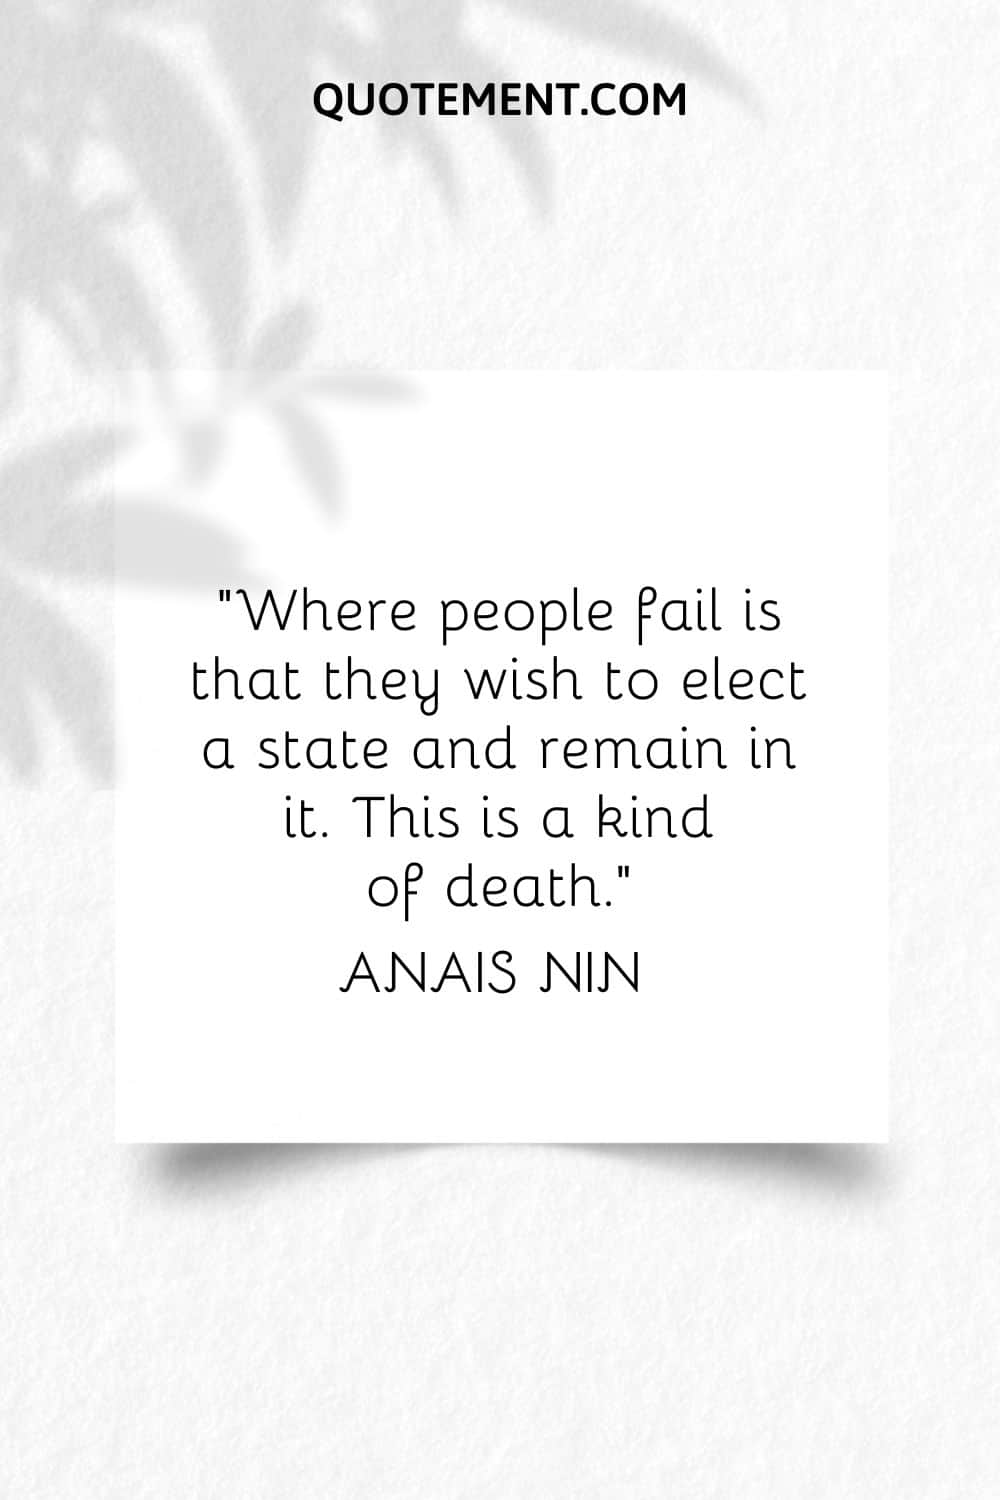 Where people fail is that they wish to elect a state and remain in it. This is a kind of death. — Anais Nin